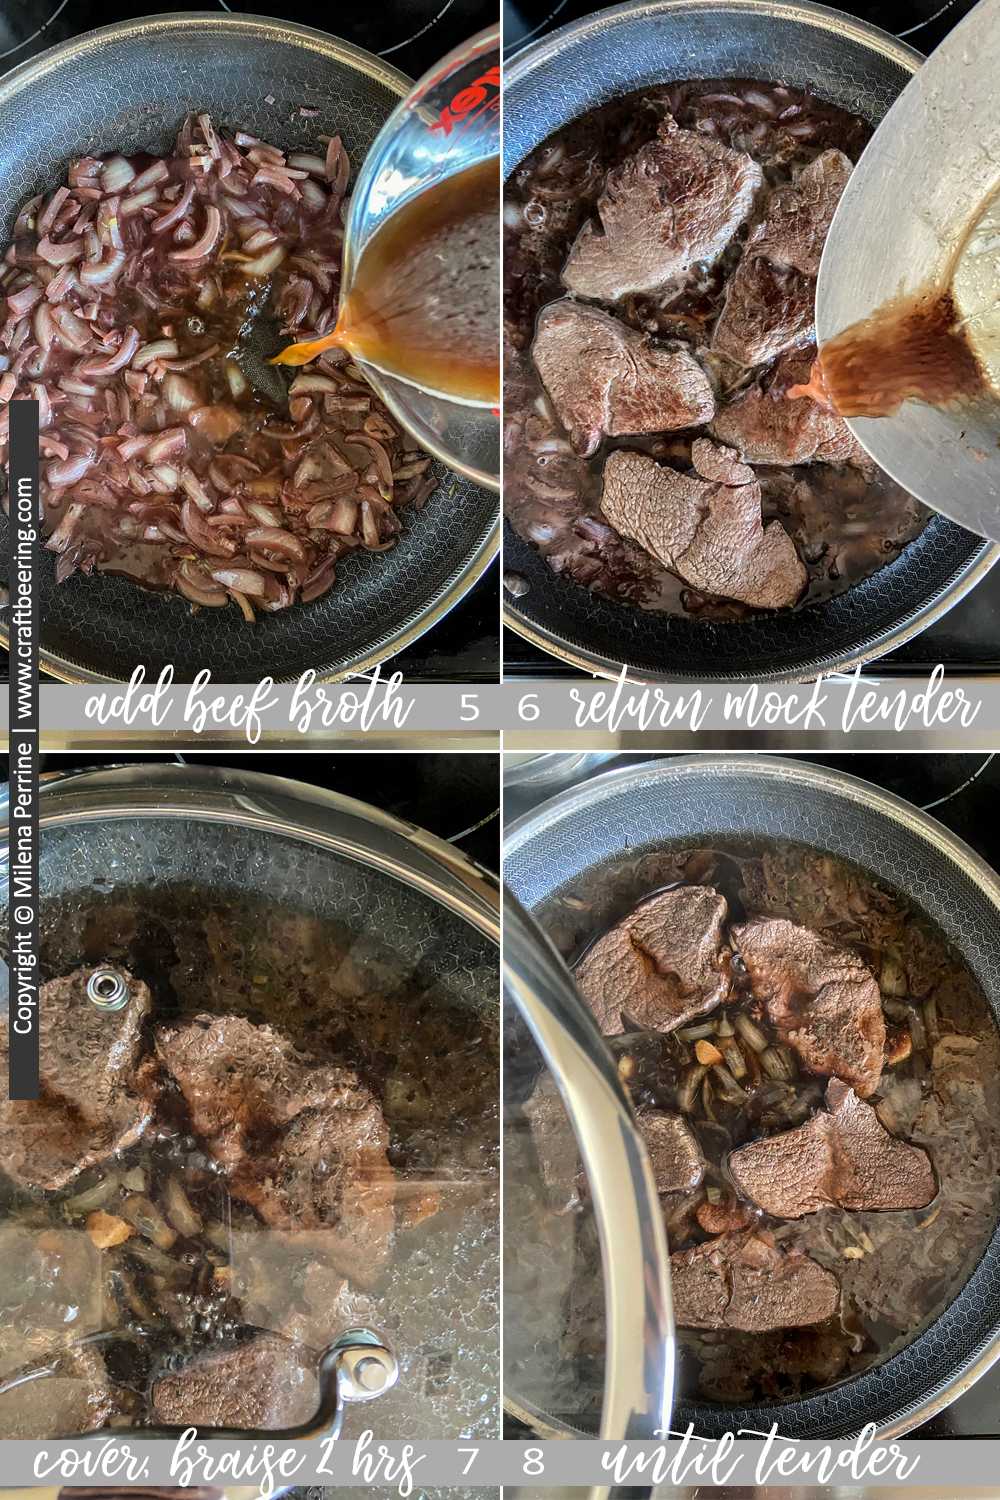 Step-by-step pictures to cook mock tender steak 2. 